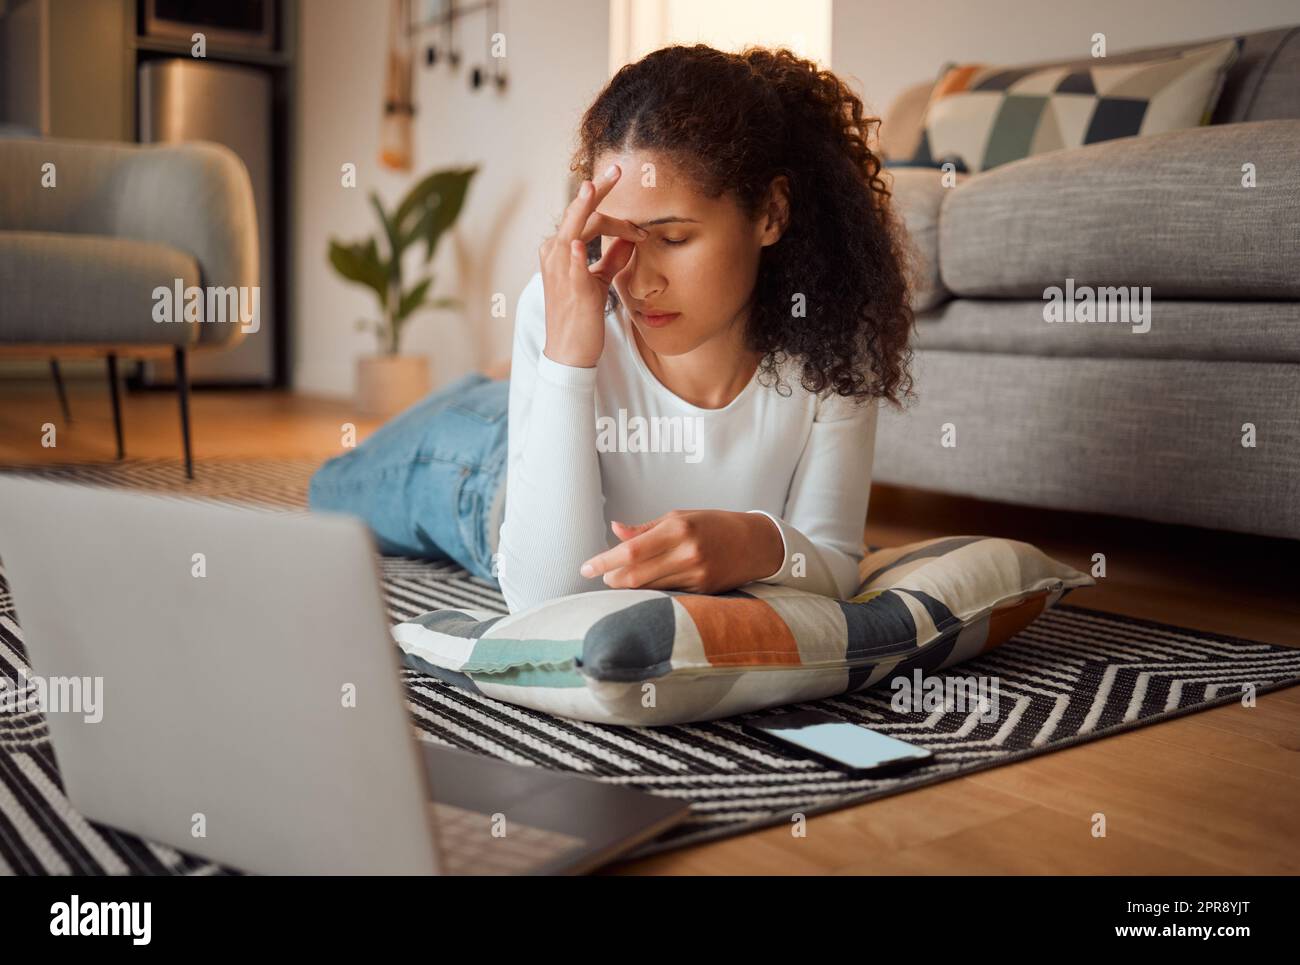 Stressed young woman using her laptop. Young woman experiencing a headache in front of her computer. Laptop issues always happen at home. Woman lying on her floor looking worried Stock Photo